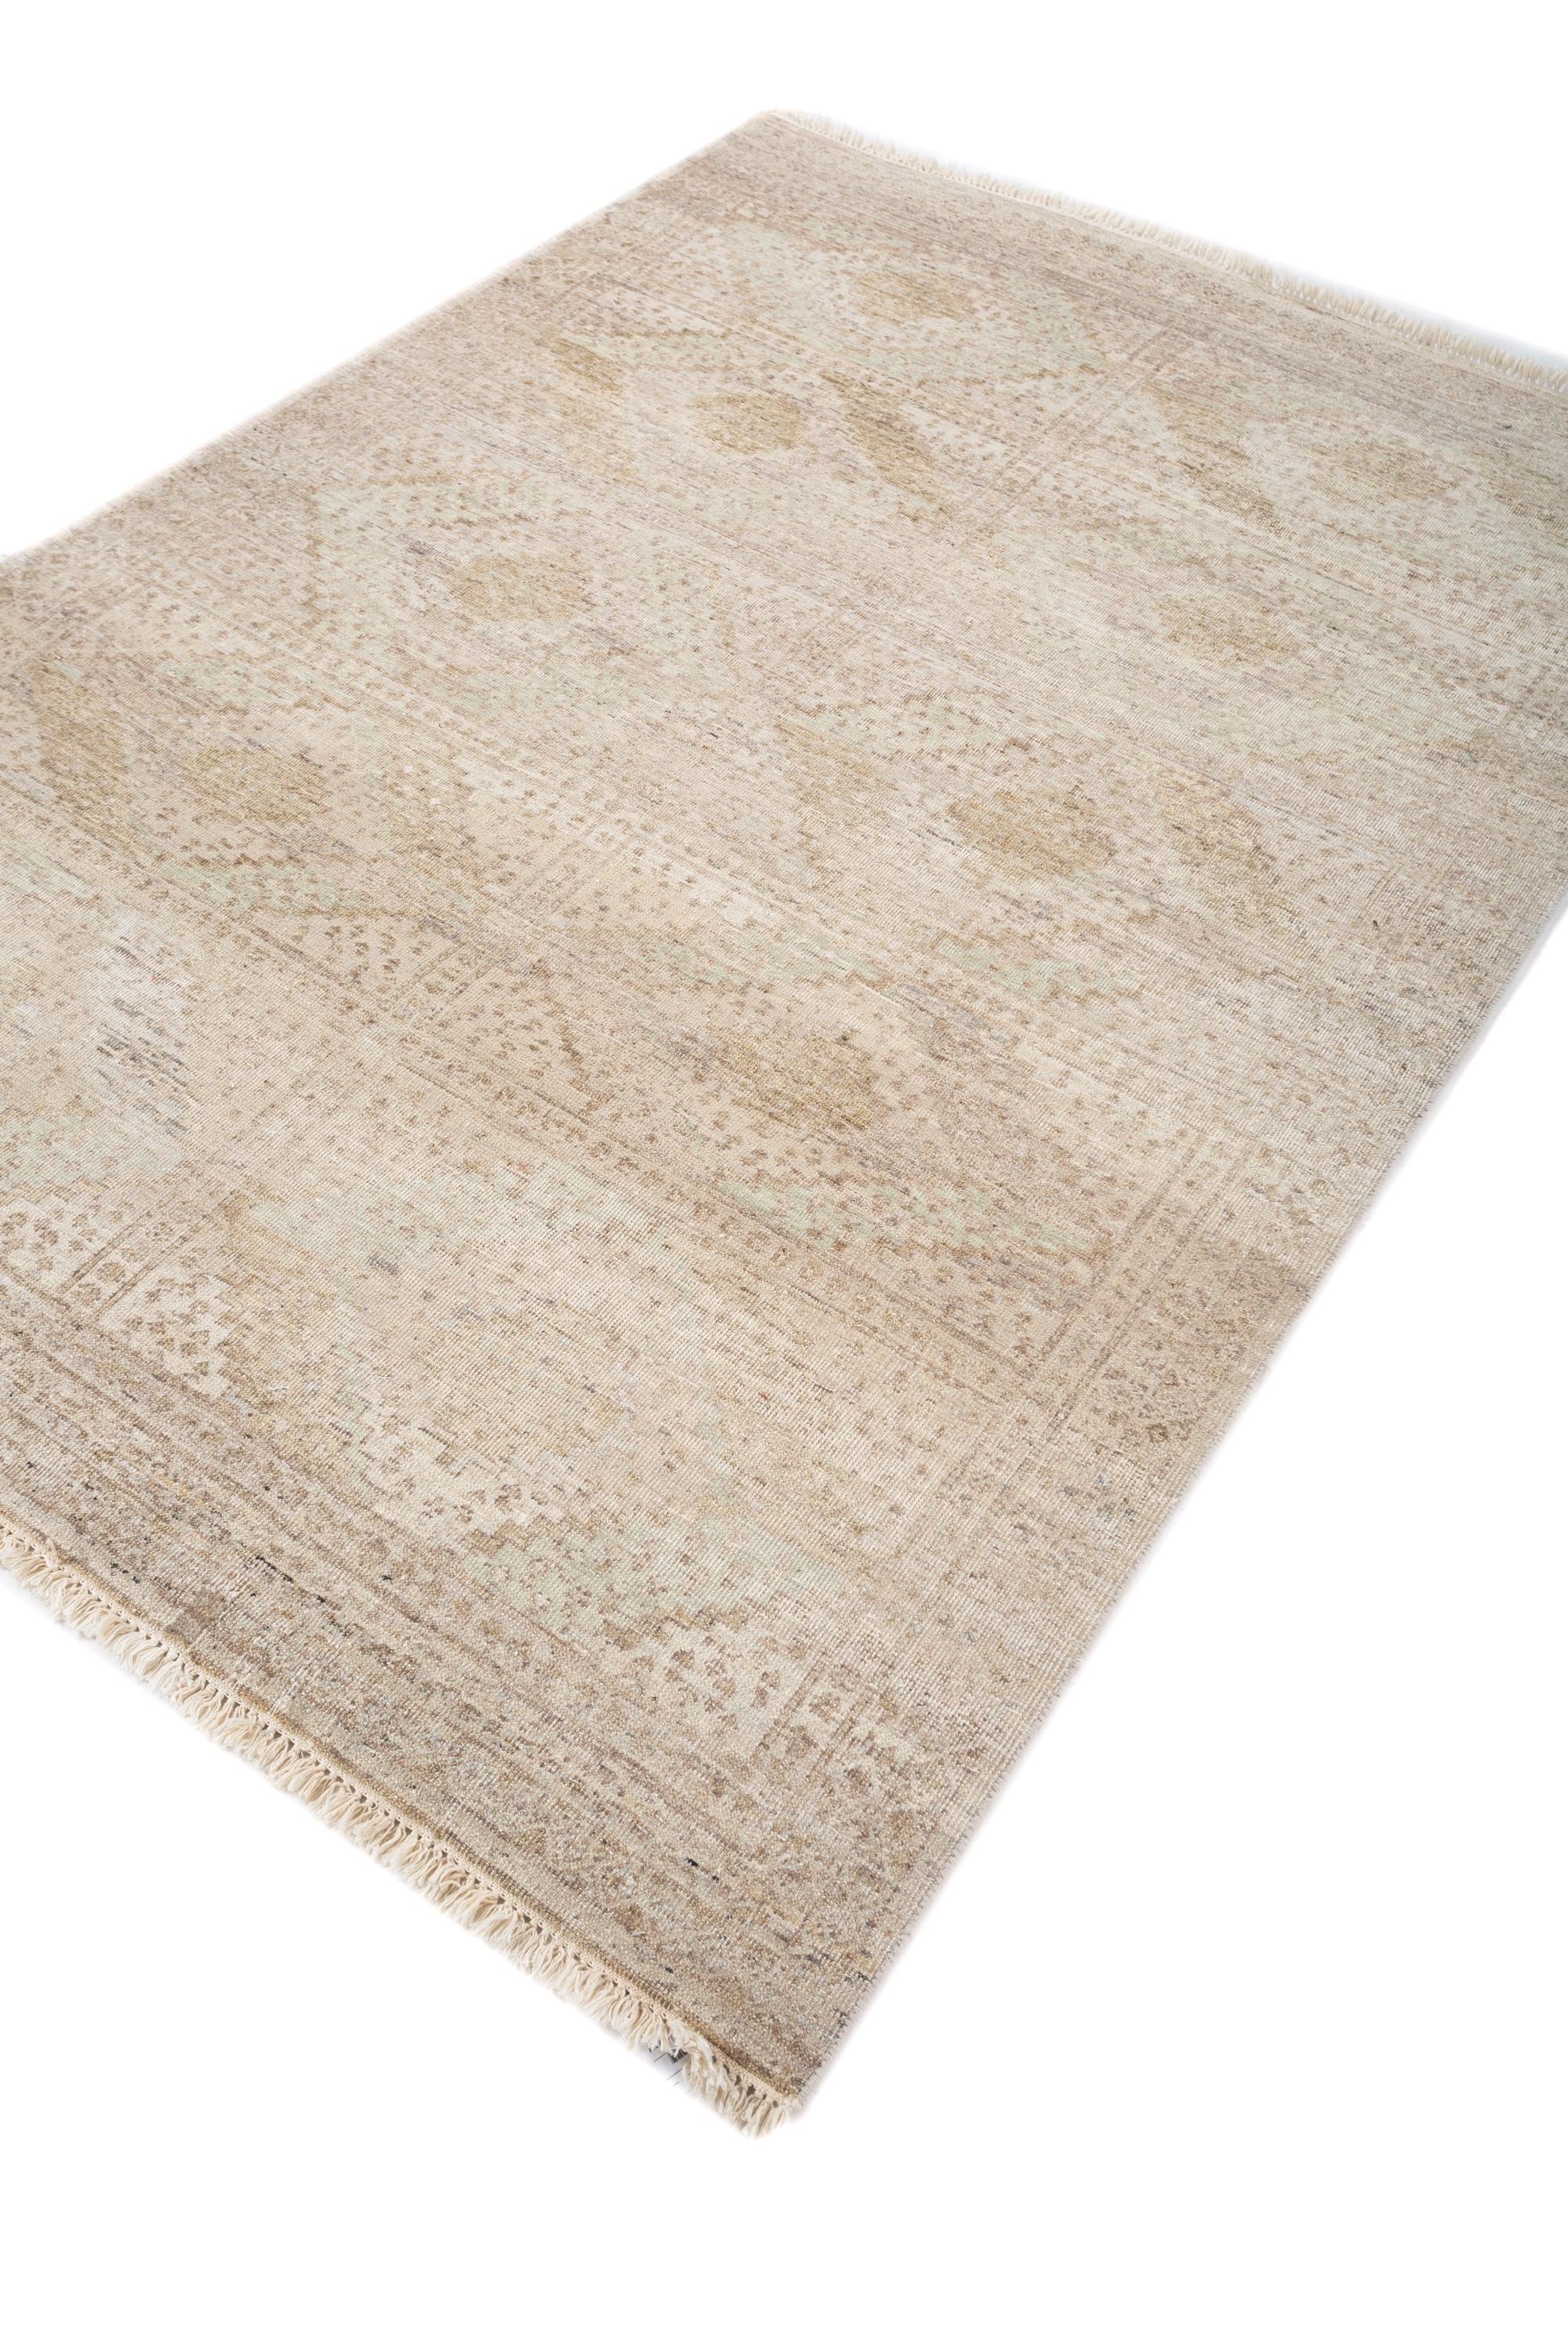 Modern Heritage Harmony Soft Beige & White 300X420 Cm Handknotted Rug For Sale